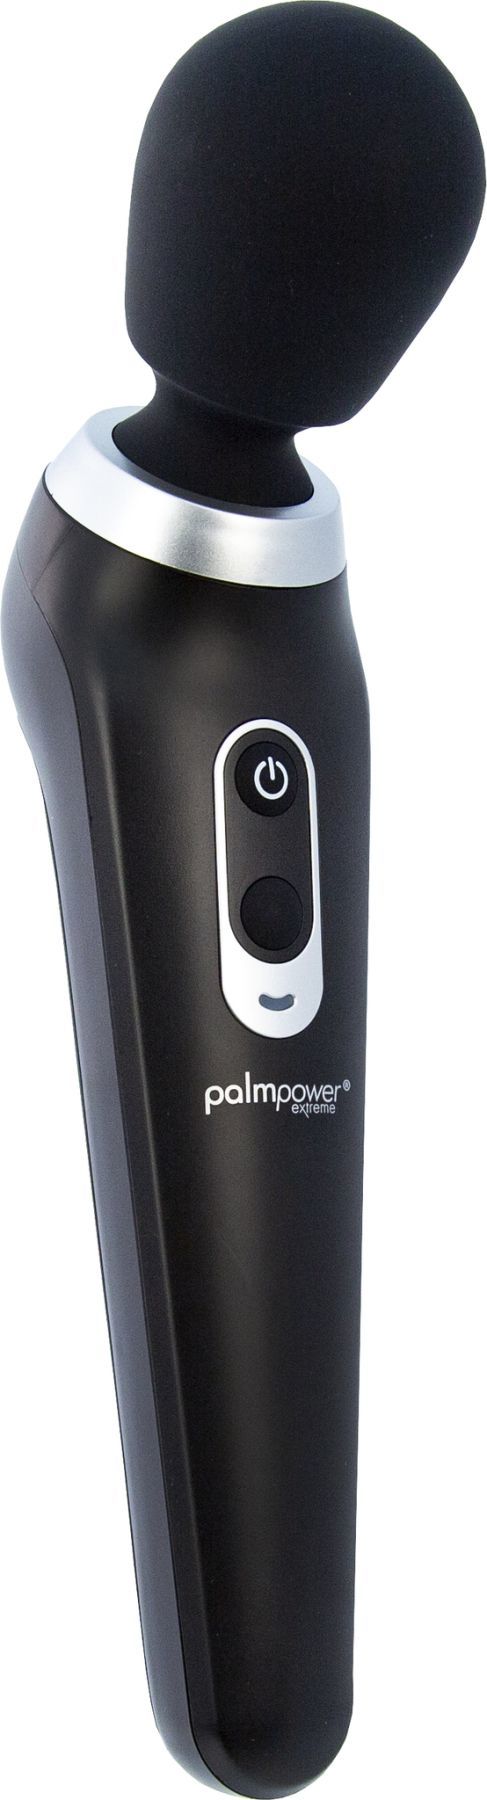  PalmPower EXTREME